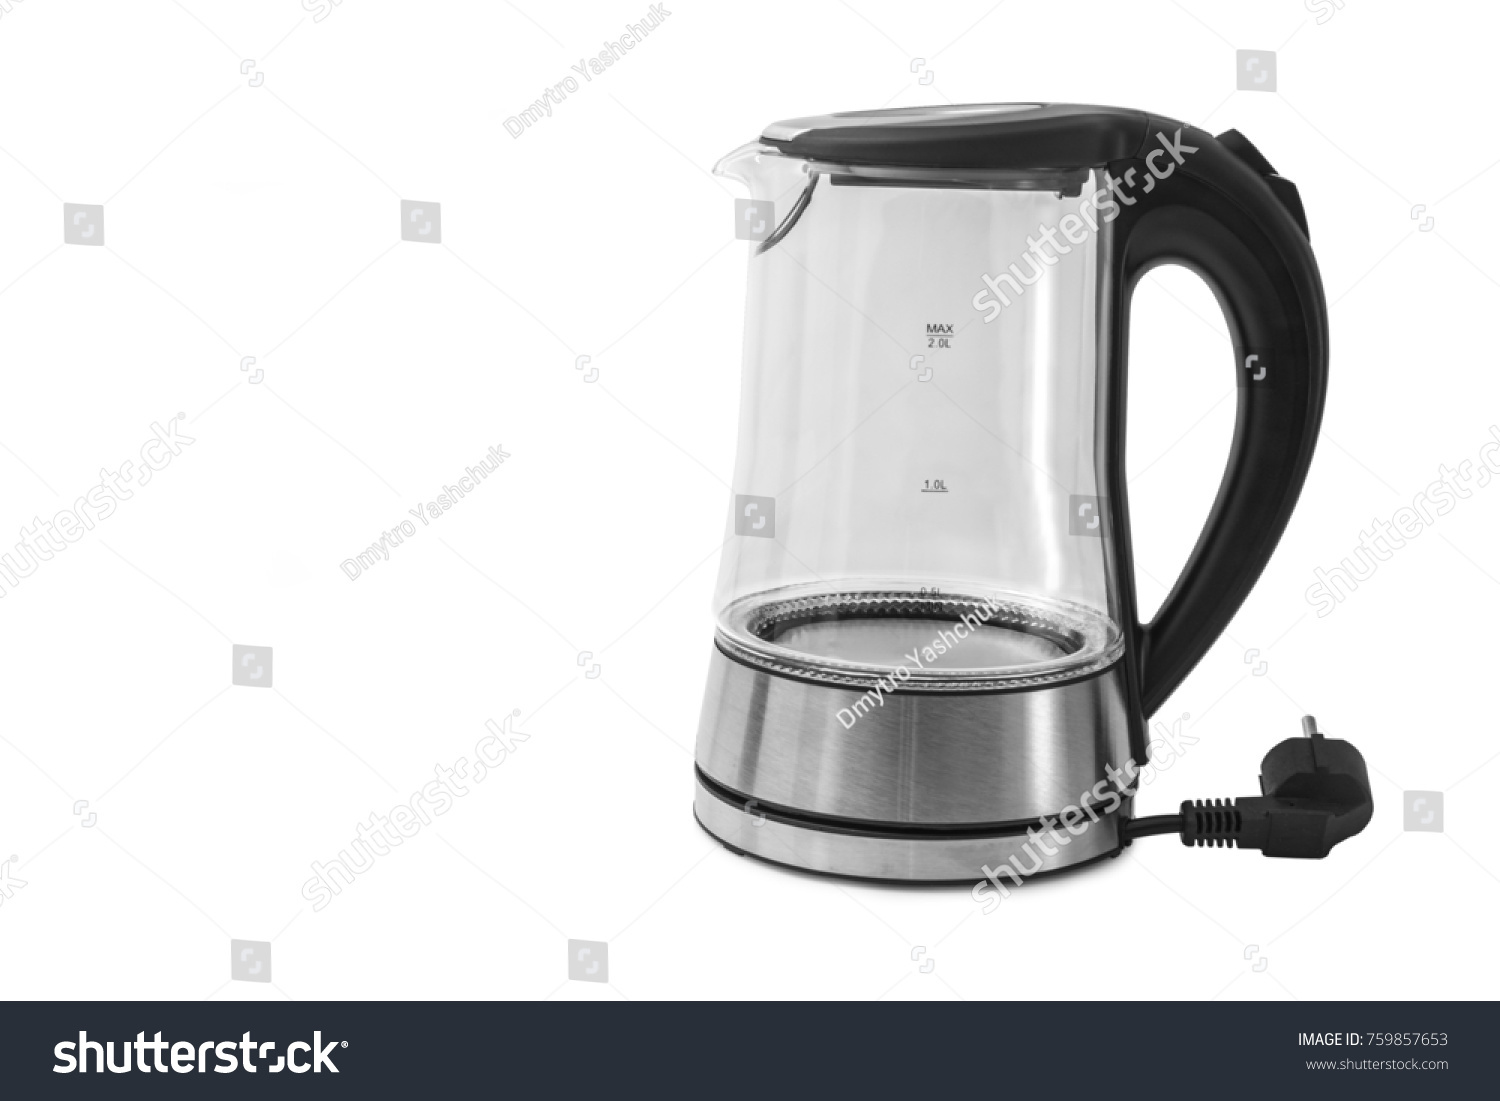 Electric Glass Kettle Isolated on White Background. Glass and Stainless Steel Tea Kettle. Domestic Appliances. Household Appliances #759857653